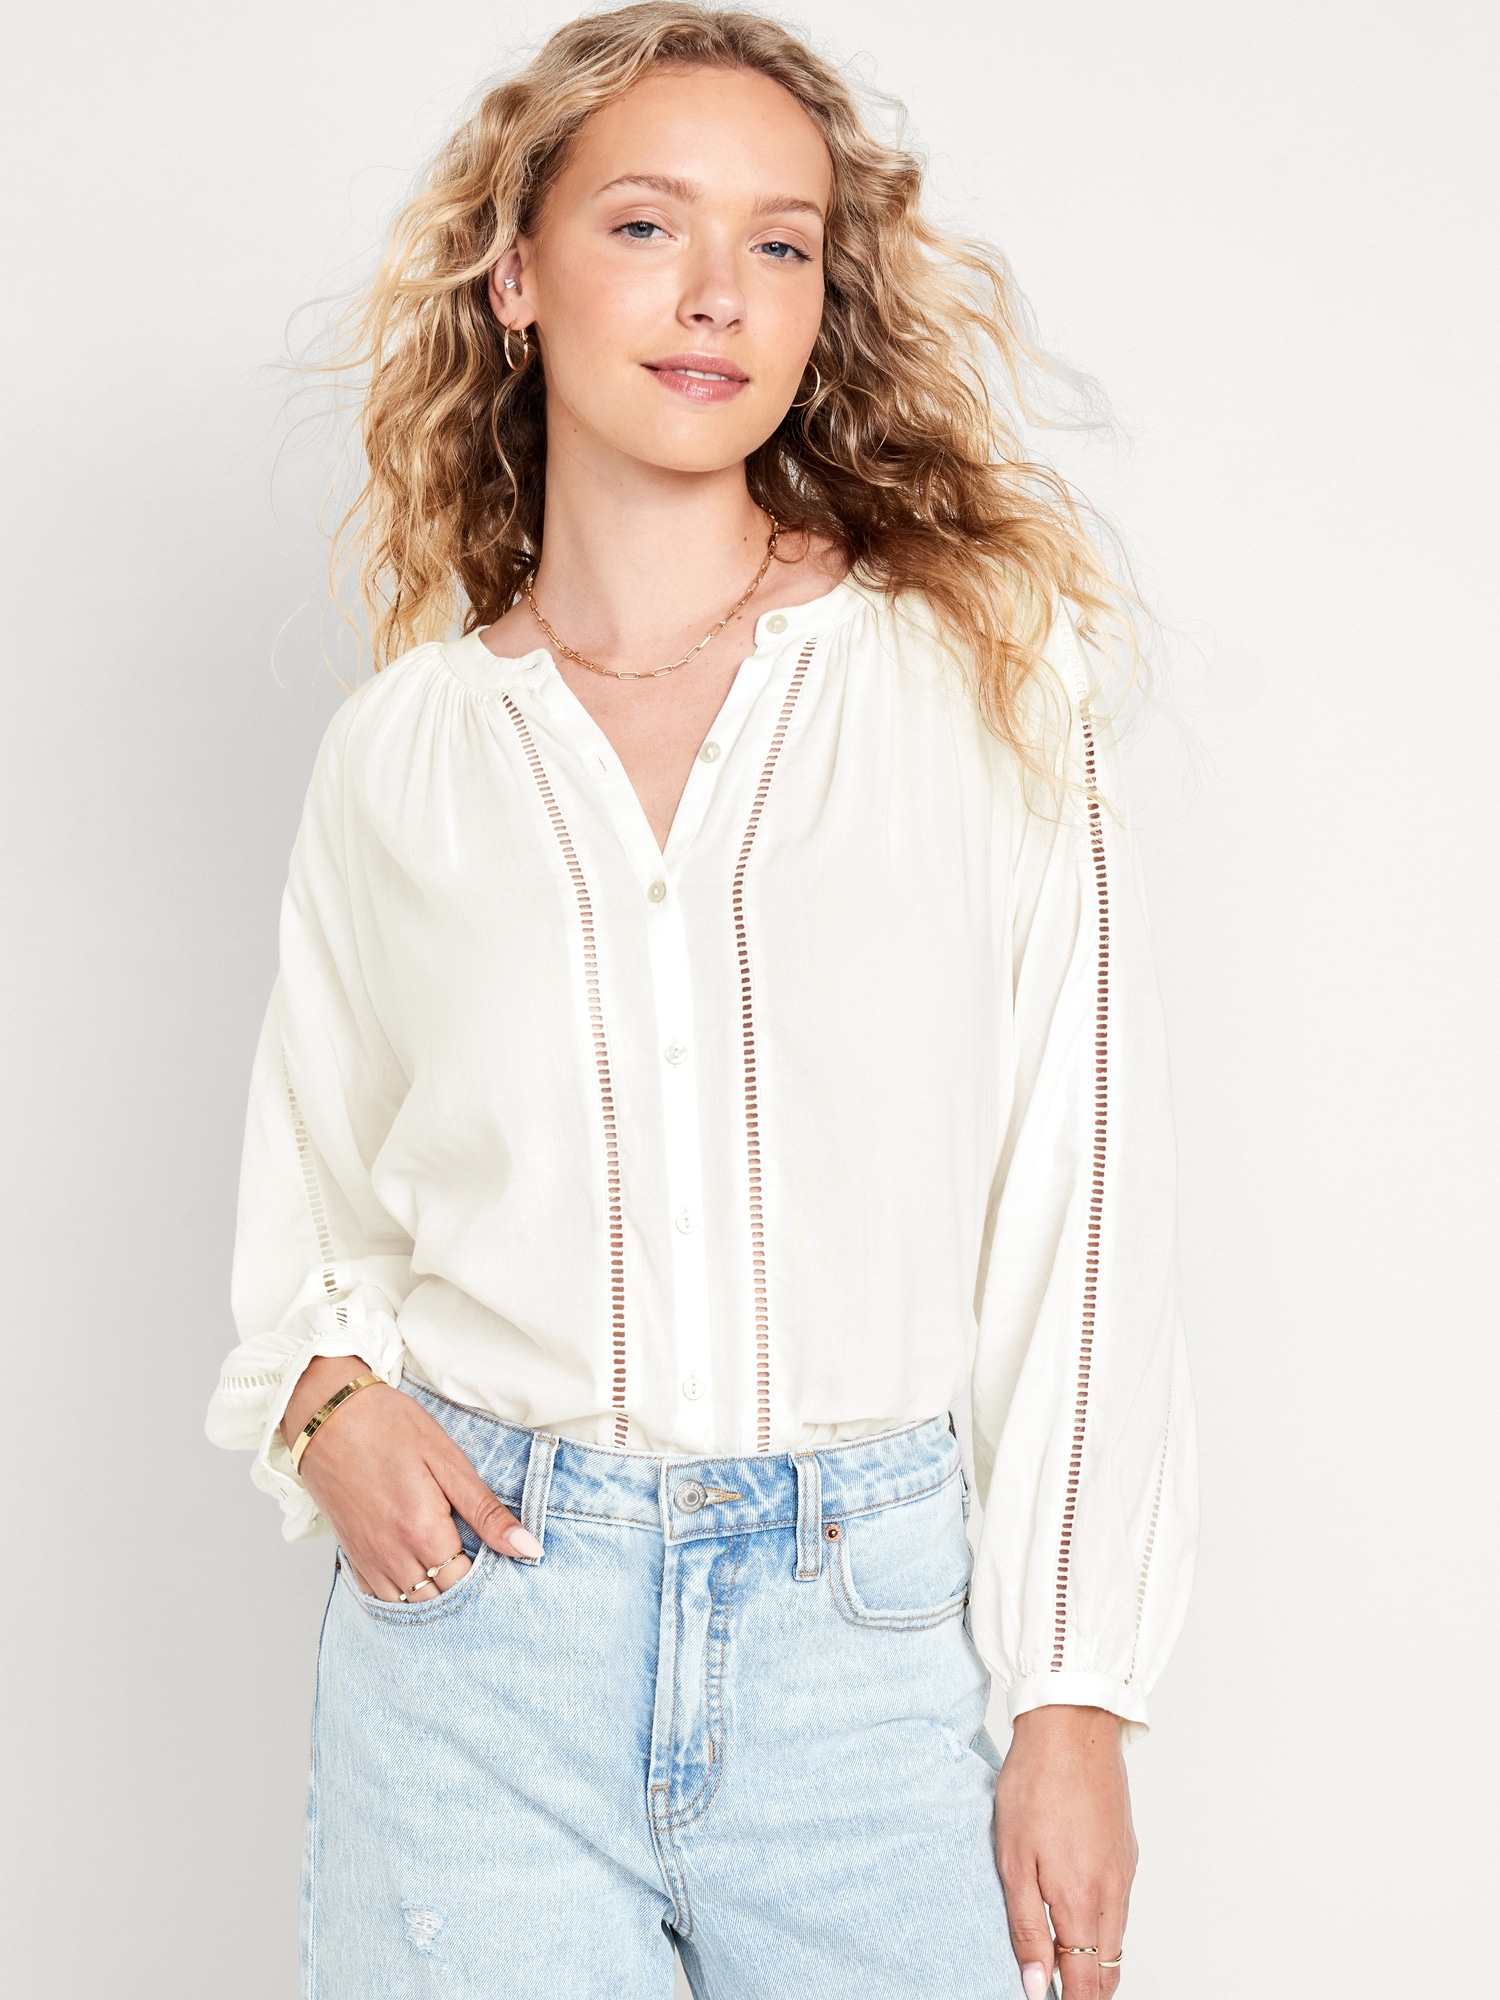 Embroidered shirt in boho style with white linen Bee